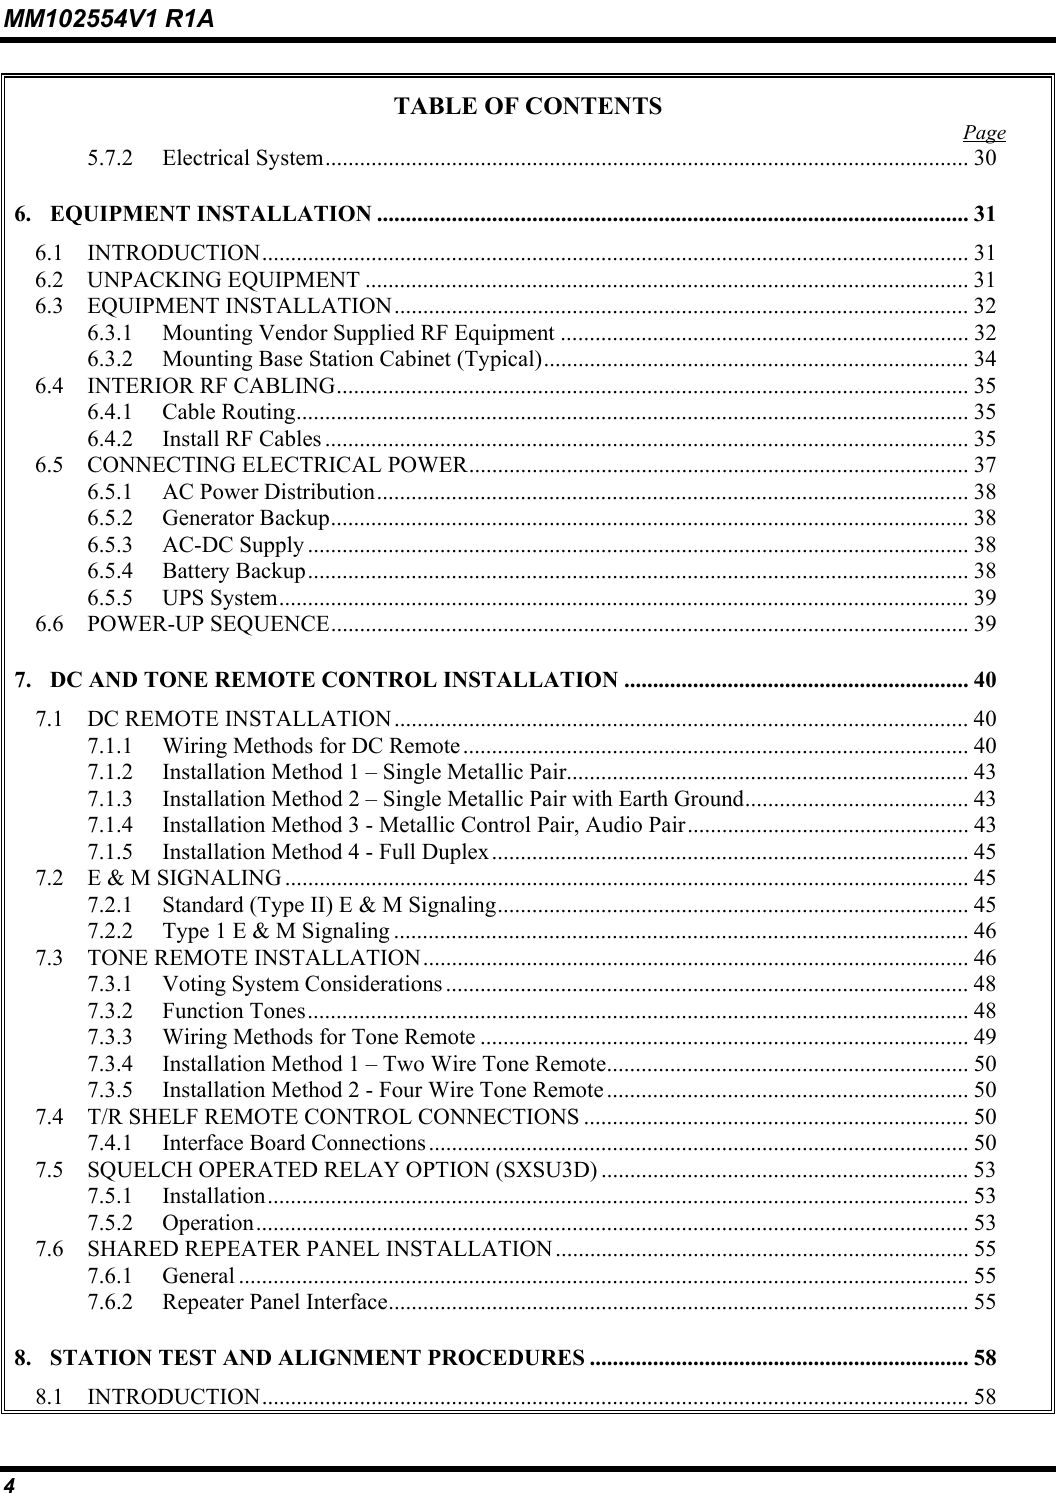 MM102554V1 R1A 4   TABLE OF CONTENTS  Page 5.7.2 Electrical System................................................................................................................ 30 6. EQUIPMENT INSTALLATION ....................................................................................................... 31 6.1 INTRODUCTION........................................................................................................................... 31 6.2 UNPACKING EQUIPMENT ......................................................................................................... 31 6.3 EQUIPMENT INSTALLATION.................................................................................................... 32 6.3.1  Mounting Vendor Supplied RF Equipment ....................................................................... 32 6.3.2  Mounting Base Station Cabinet (Typical).......................................................................... 34 6.4 INTERIOR RF CABLING.............................................................................................................. 35 6.4.1 Cable Routing..................................................................................................................... 35 6.4.2  Install RF Cables ................................................................................................................ 35 6.5  CONNECTING ELECTRICAL POWER....................................................................................... 37 6.5.1  AC Power Distribution....................................................................................................... 38 6.5.2 Generator Backup............................................................................................................... 38 6.5.3 AC-DC Supply ................................................................................................................... 38 6.5.4 Battery Backup................................................................................................................... 38 6.5.5 UPS System........................................................................................................................ 39 6.6 POWER-UP SEQUENCE............................................................................................................... 39 7. DC AND TONE REMOTE CONTROL INSTALLATION ............................................................ 40 7.1  DC REMOTE INSTALLATION.................................................................................................... 40 7.1.1  Wiring Methods for DC Remote........................................................................................ 40 7.1.2  Installation Method 1 – Single Metallic Pair...................................................................... 43 7.1.3  Installation Method 2 – Single Metallic Pair with Earth Ground....................................... 43 7.1.4  Installation Method 3 - Metallic Control Pair, Audio Pair................................................. 43 7.1.5  Installation Method 4 - Full Duplex................................................................................... 45 7.2  E &amp; M SIGNALING ....................................................................................................................... 45 7.2.1  Standard (Type II) E &amp; M Signaling.................................................................................. 45 7.2.2  Type 1 E &amp; M Signaling .................................................................................................... 46 7.3  TONE REMOTE INSTALLATION............................................................................................... 46 7.3.1  Voting System Considerations ........................................................................................... 48 7.3.2 Function Tones................................................................................................................... 48 7.3.3  Wiring Methods for Tone Remote ..................................................................................... 49 7.3.4  Installation Method 1 – Two Wire Tone Remote............................................................... 50 7.3.5  Installation Method 2 - Four Wire Tone Remote ............................................................... 50 7.4  T/R SHELF REMOTE CONTROL CONNECTIONS ................................................................... 50 7.4.1  Interface Board Connections.............................................................................................. 50 7.5  SQUELCH OPERATED RELAY OPTION (SXSU3D) ................................................................ 53 7.5.1 Installation.......................................................................................................................... 53 7.5.2 Operation............................................................................................................................ 53 7.6  SHARED REPEATER PANEL INSTALLATION........................................................................ 55 7.6.1 General ............................................................................................................................... 55 7.6.2  Repeater Panel Interface..................................................................................................... 55 8. STATION TEST AND ALIGNMENT PROCEDURES .................................................................. 58 8.1 INTRODUCTION........................................................................................................................... 58 